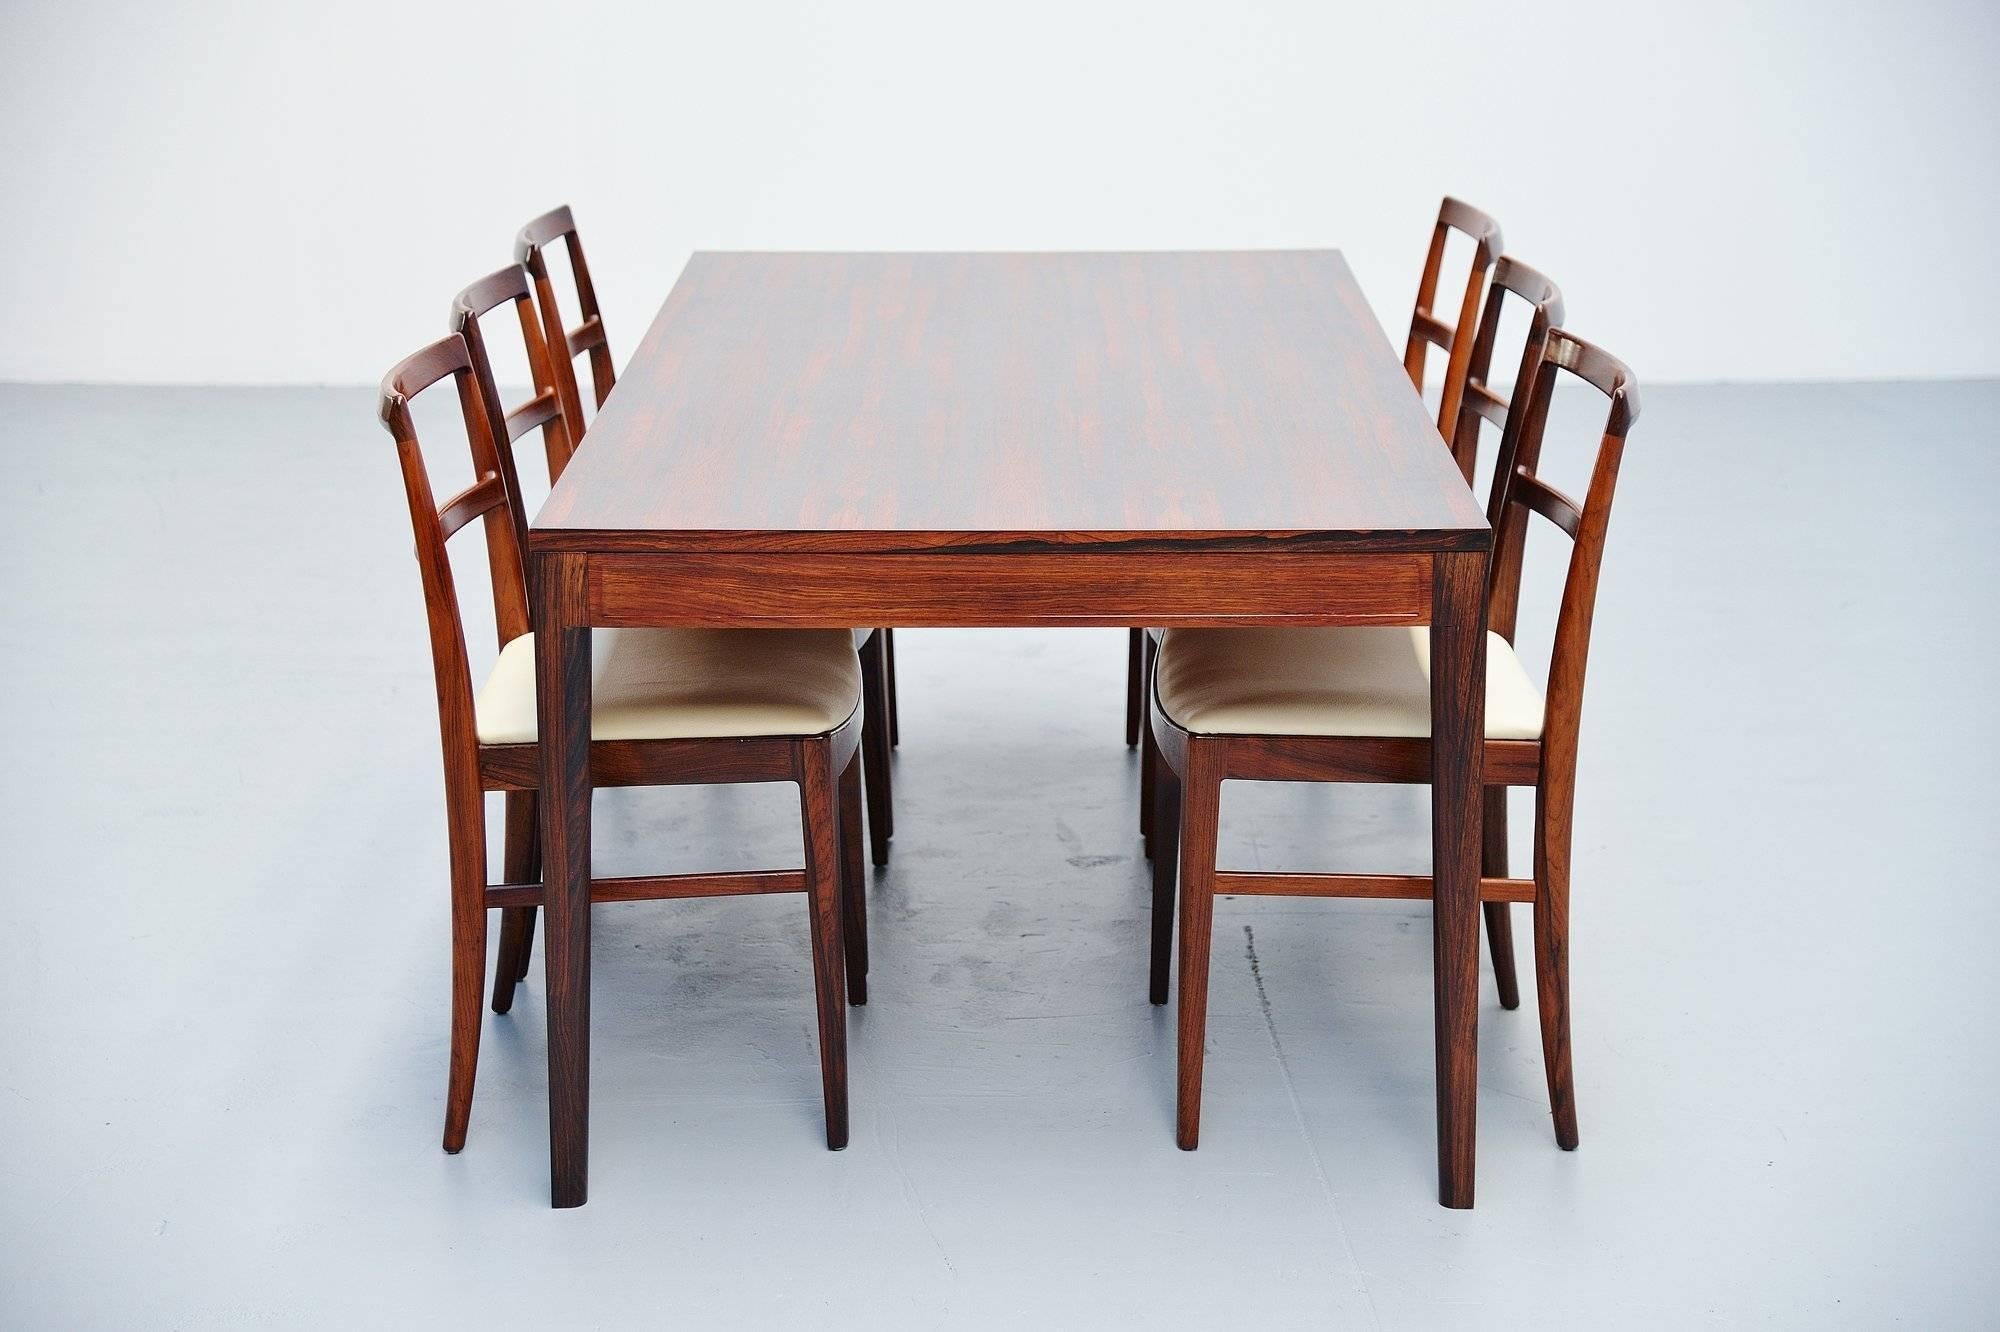 Fantastic grained rosewood dining table designed by Finn Juhl and manufactured by France & Son, Denmark, 1962. This table is from the 'Diplomat' office series, there were also desks and cabinets from these series. This is for a very nice and lovely